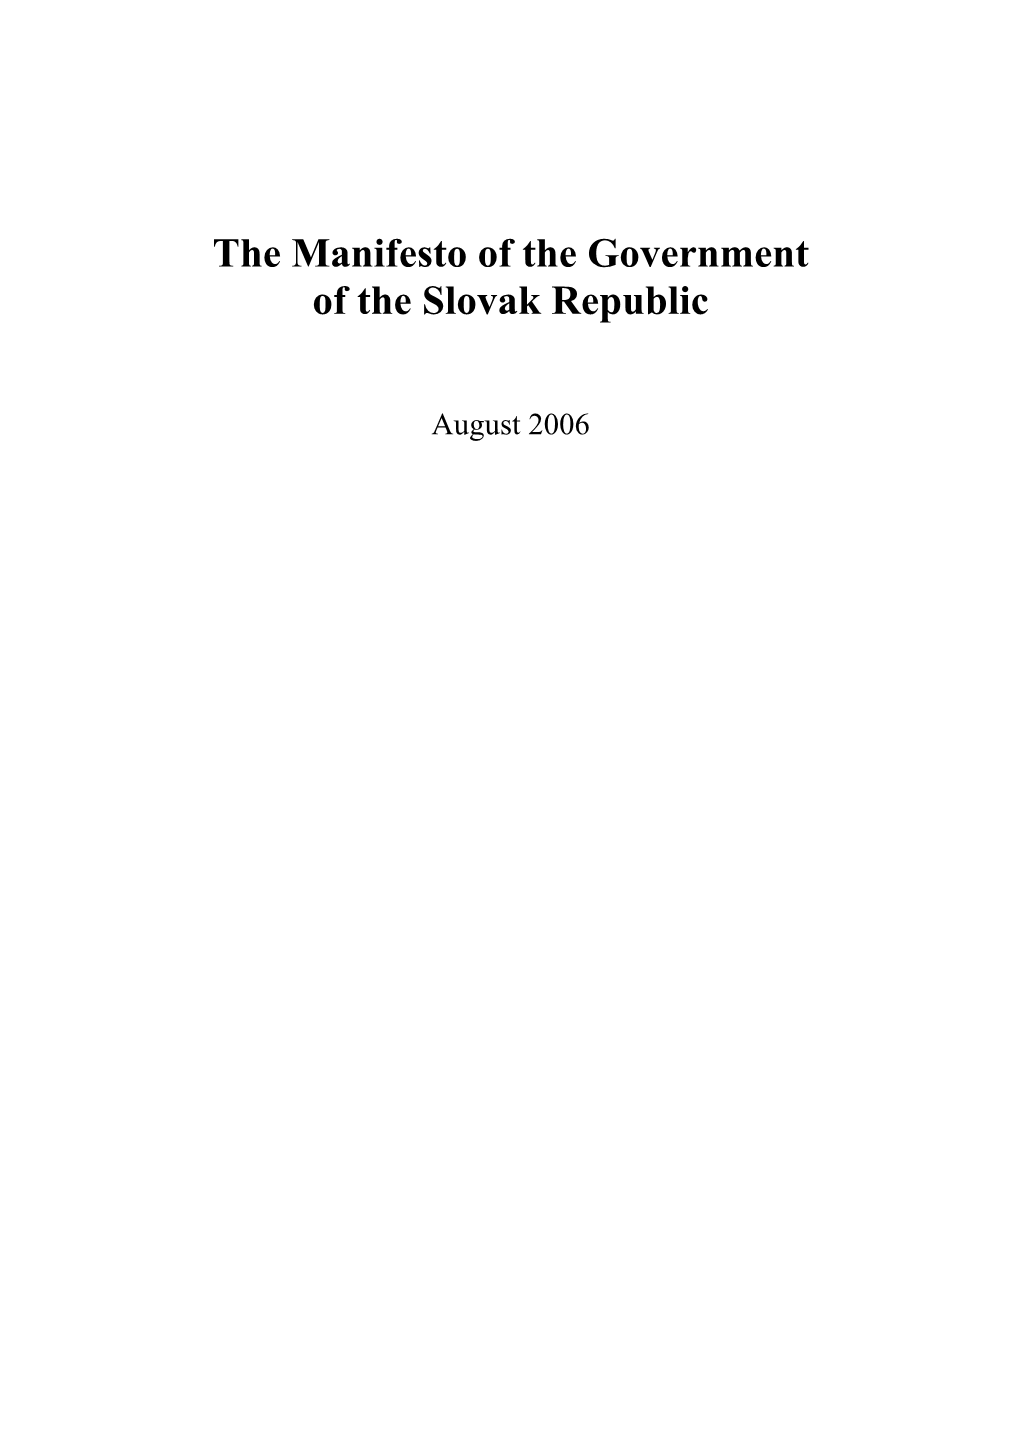 The Manifesto of the Government of the Slovak Republic